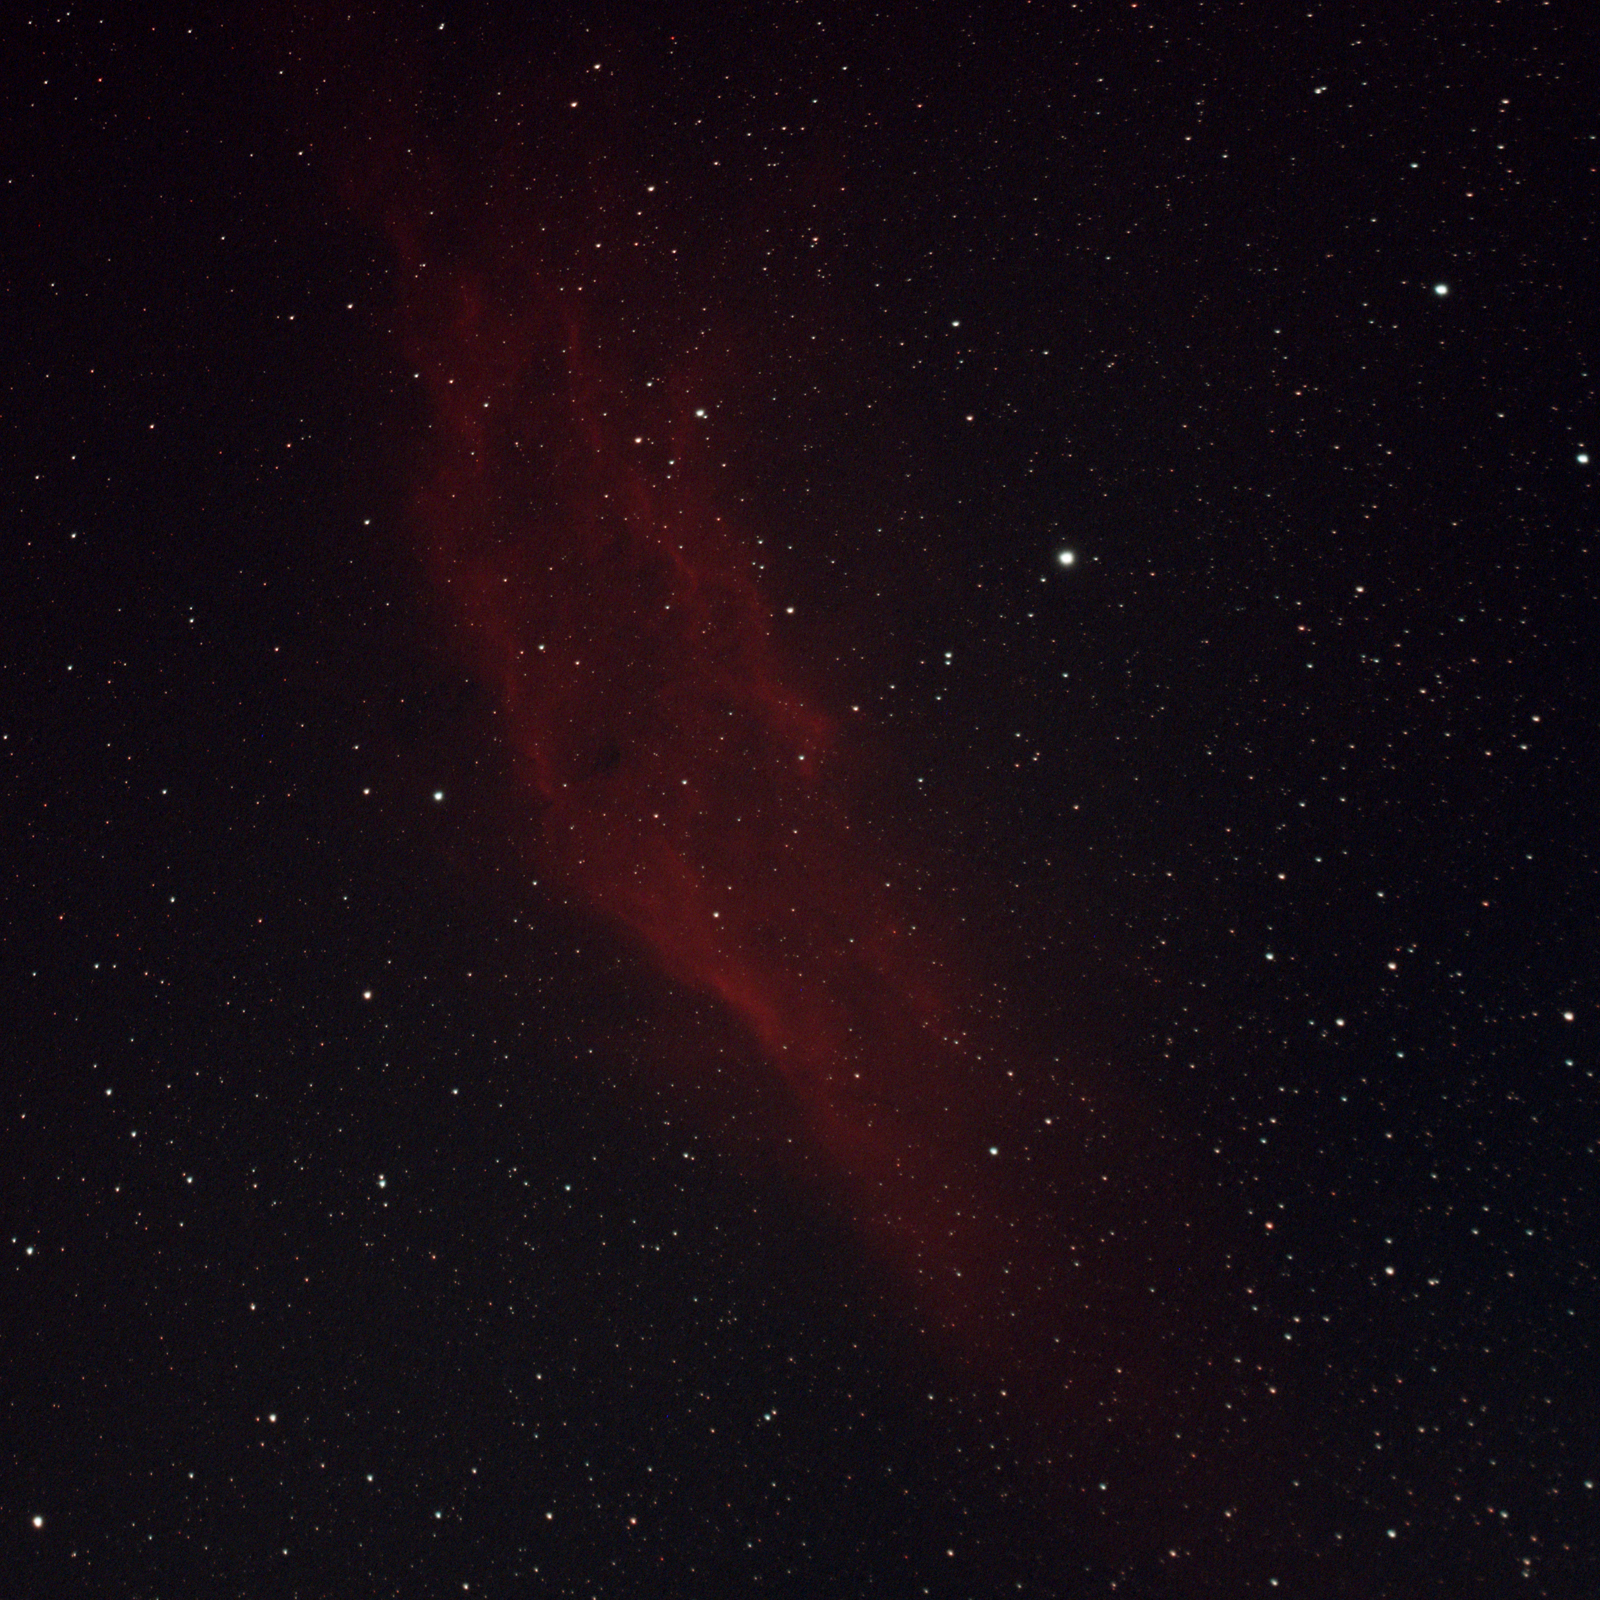 NGC1499 61f4 7 2600 g300 br10 48F 1440S NoEdit 10242022m